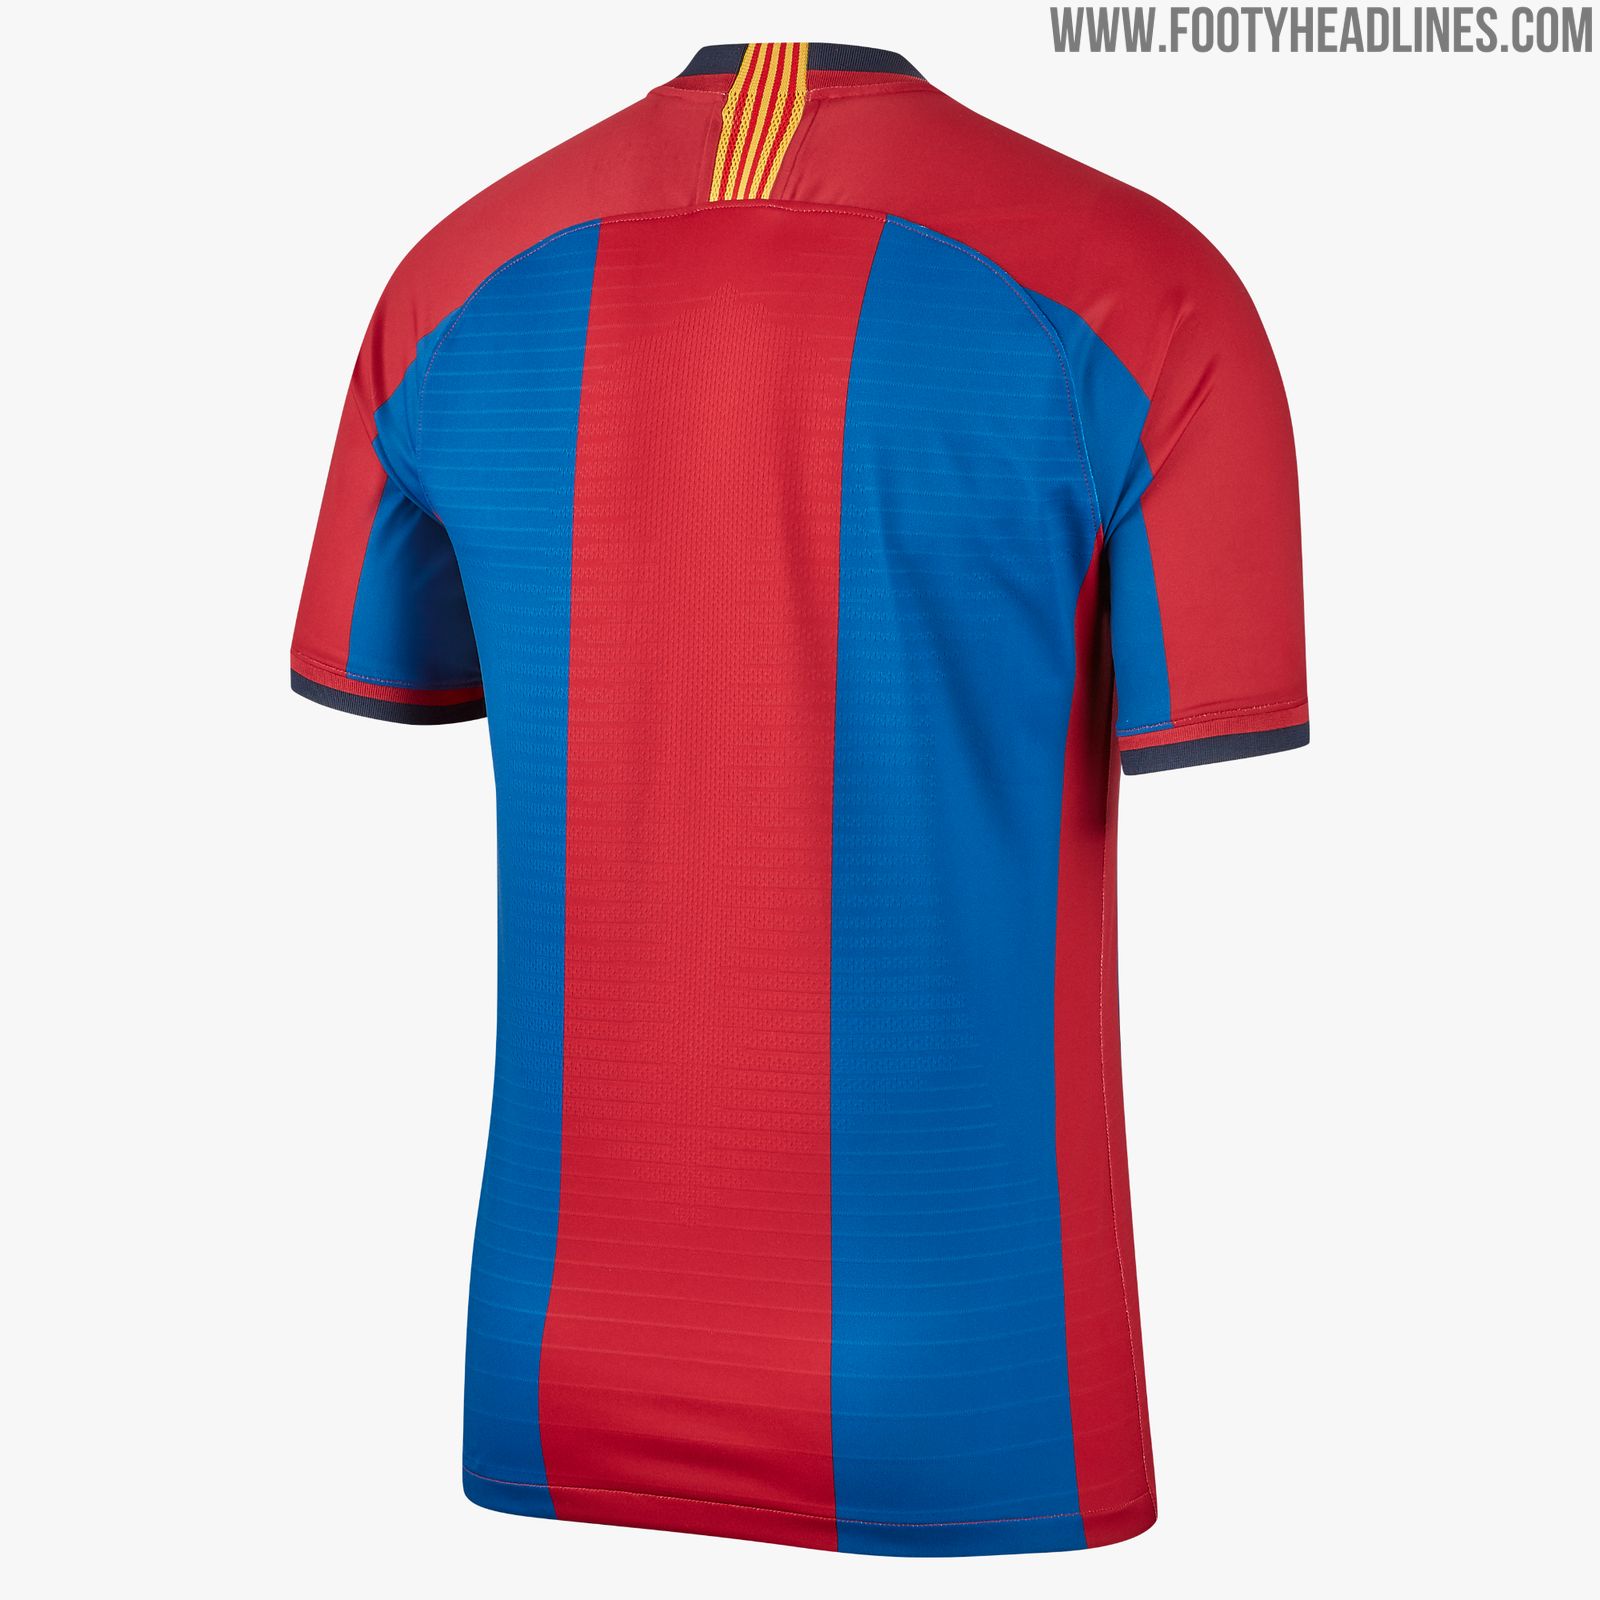 Special-Edition Nike FC Barcelona 1998-99 Remake Kit Released - Footy ...